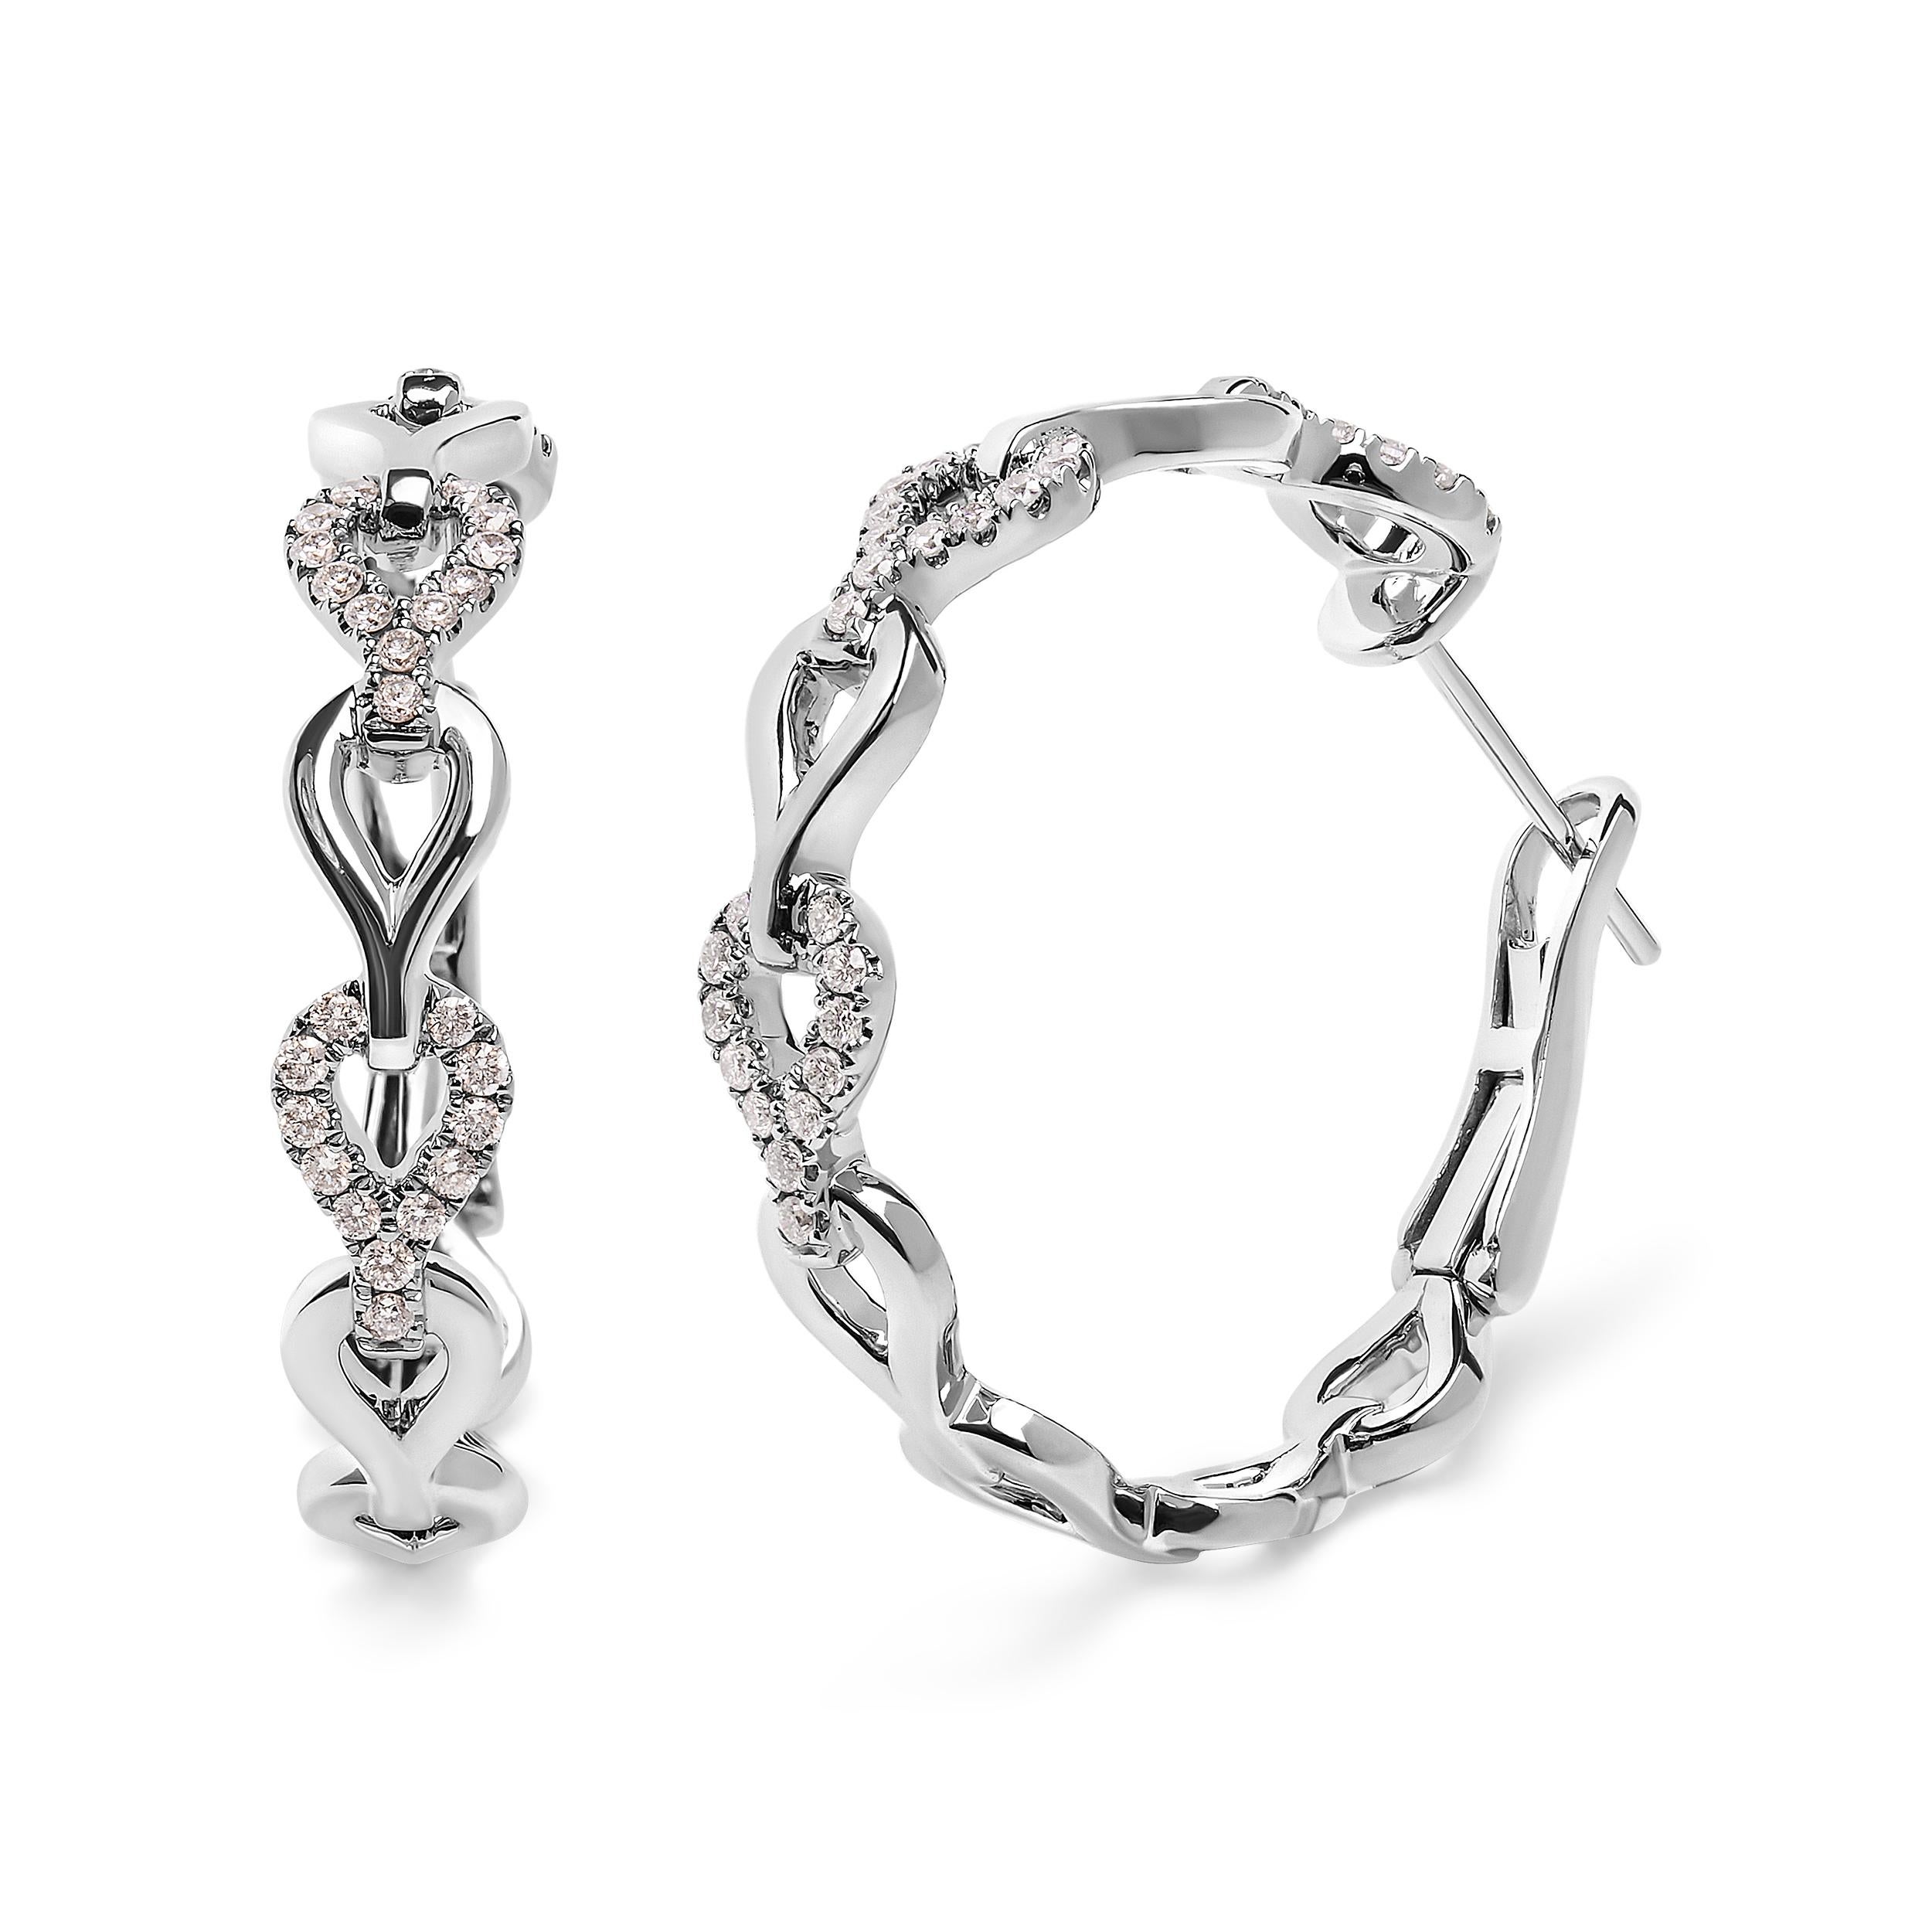 Introducing our exquisite 14K White Gold Hoop Earrings, a dazzling masterpiece that will leave you breathless. Crafted with love and care, these earrings feature a stunning heart link design, symbolizing eternal love and beauty. Adorned with 74